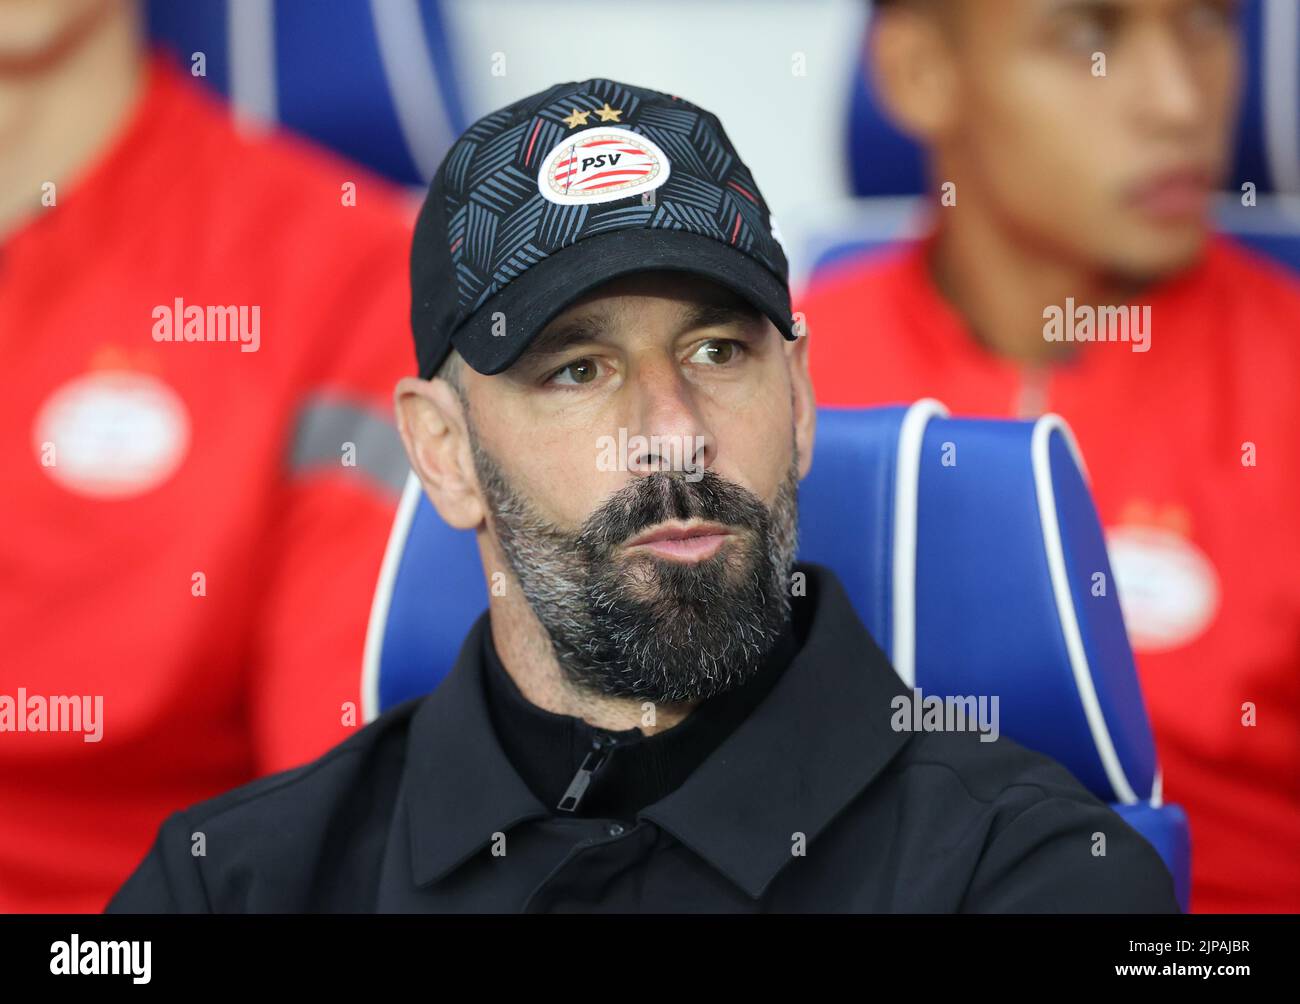 PSV Eindhoven manager Ruud van Nistelrooy during the Champions League qualifying match at Ibrox, Glasgow. Picture date: Tuesday August 16, 2022. Stock Photo